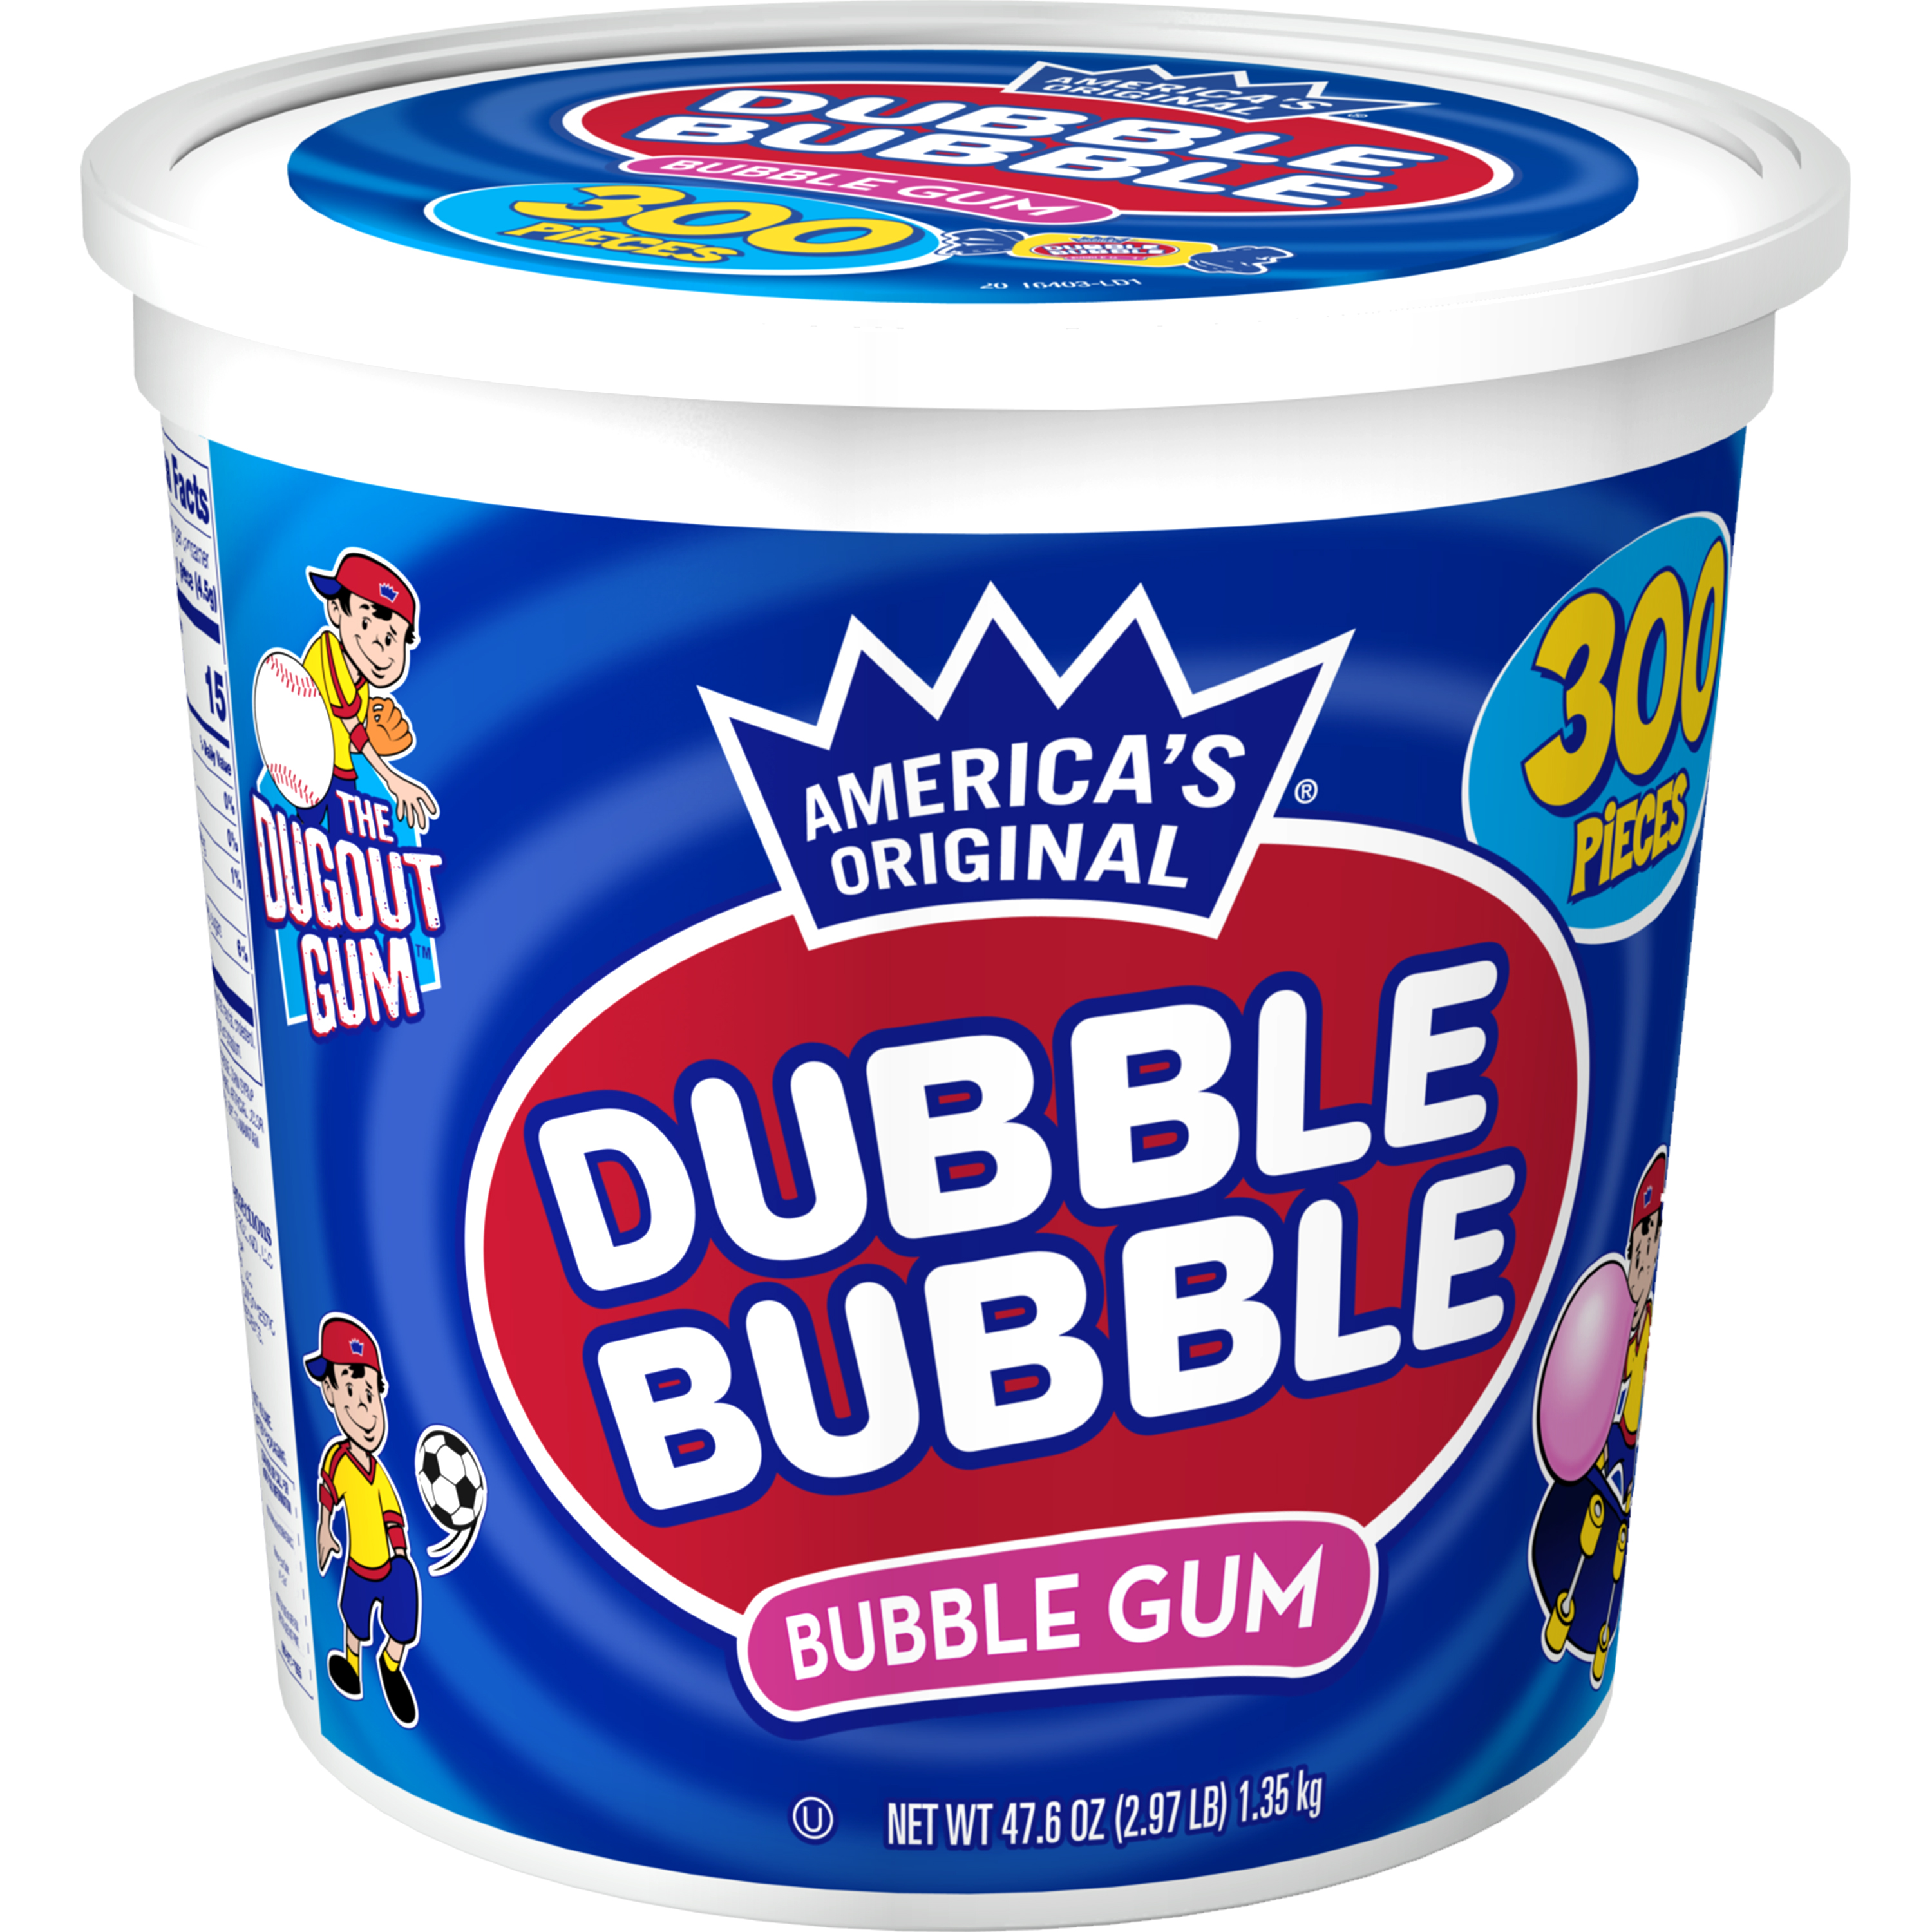 Bubble gum in a dish game